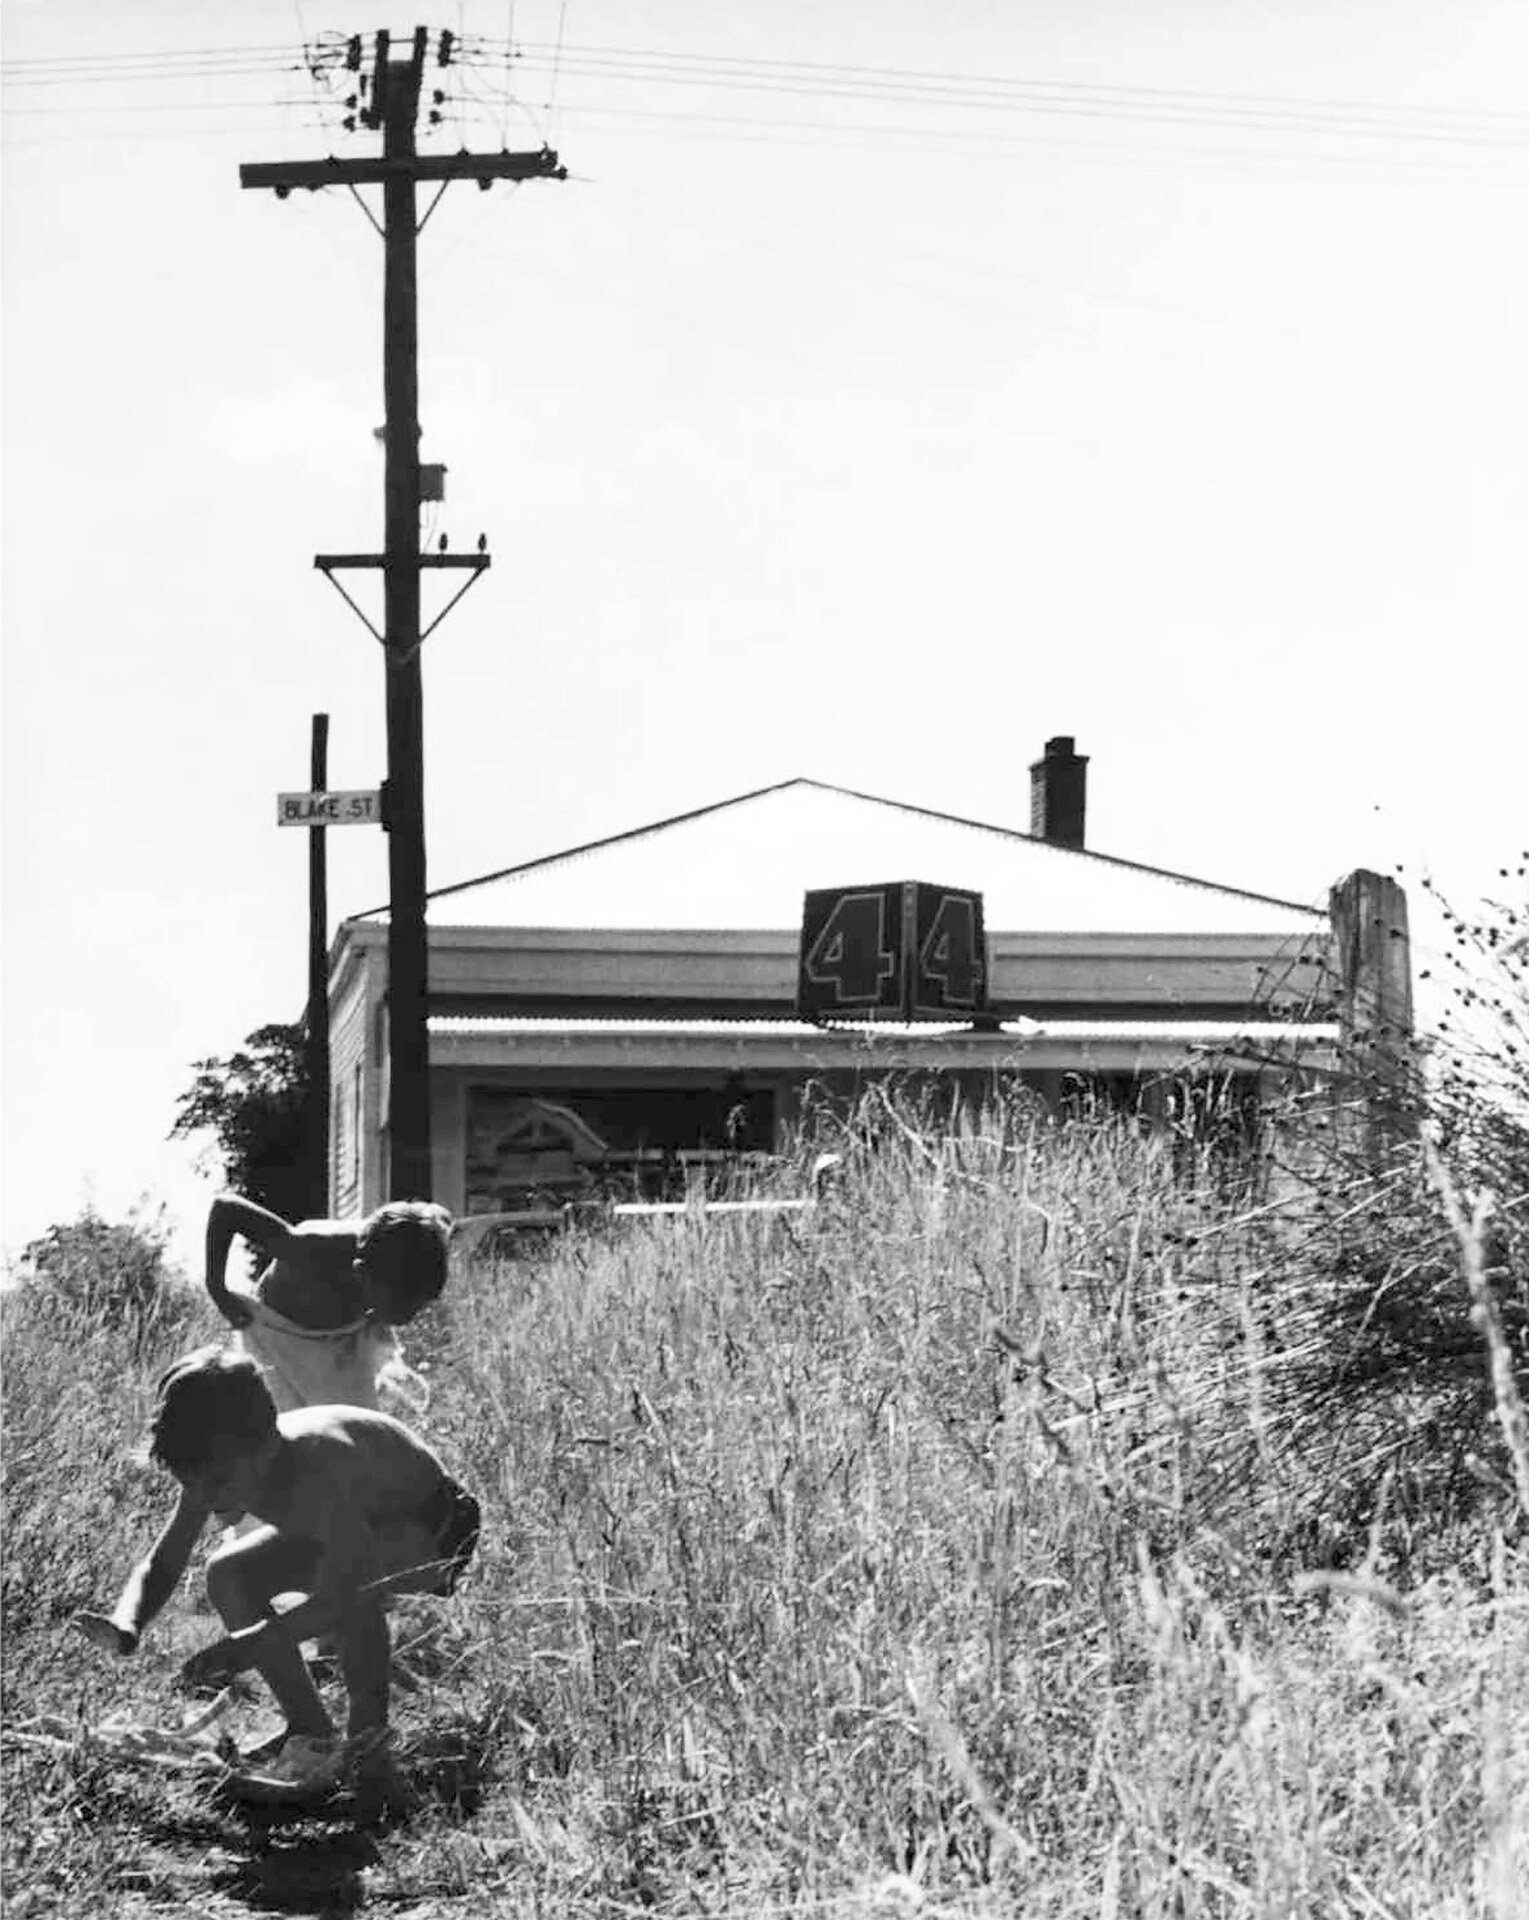  Ans Westra,  Catching crickets, Greymouth , 1971 